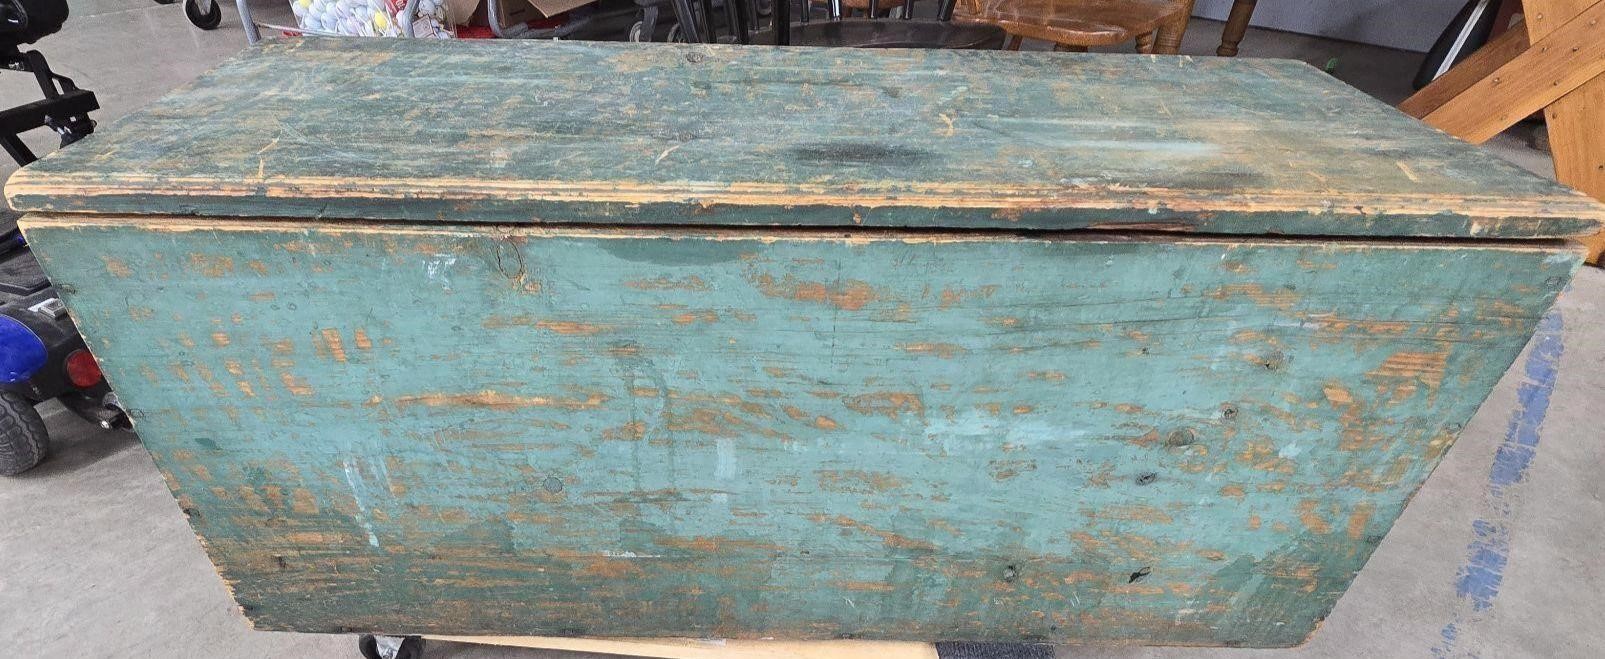 Rustic chest and contents